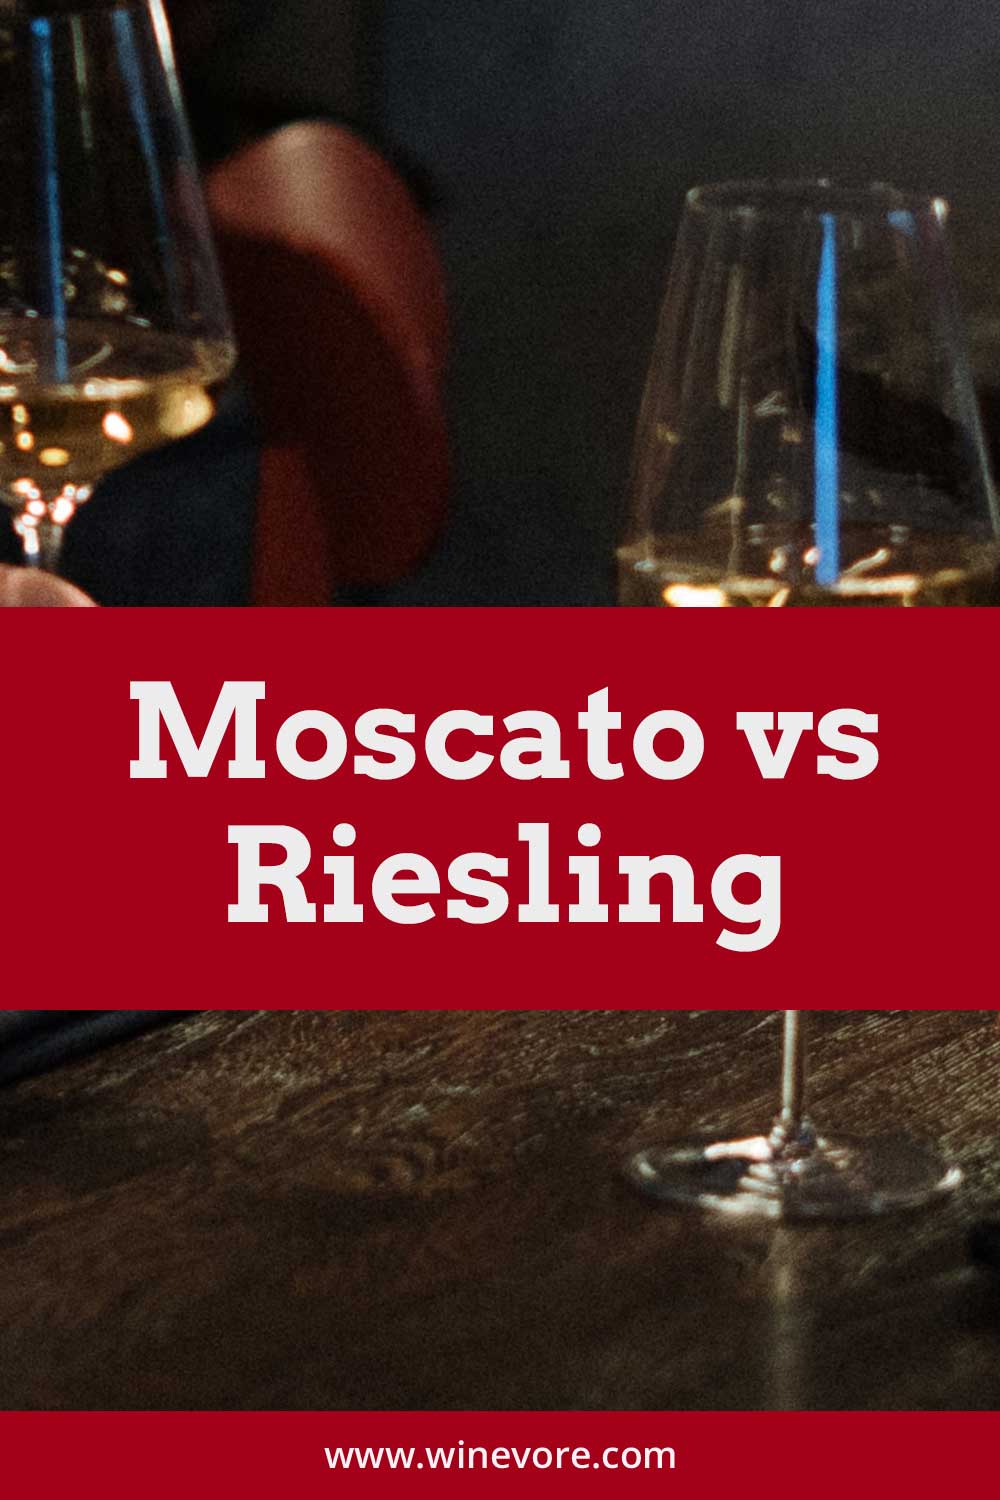 Wine glasses with white wines in them - Moscato vs. Riesling